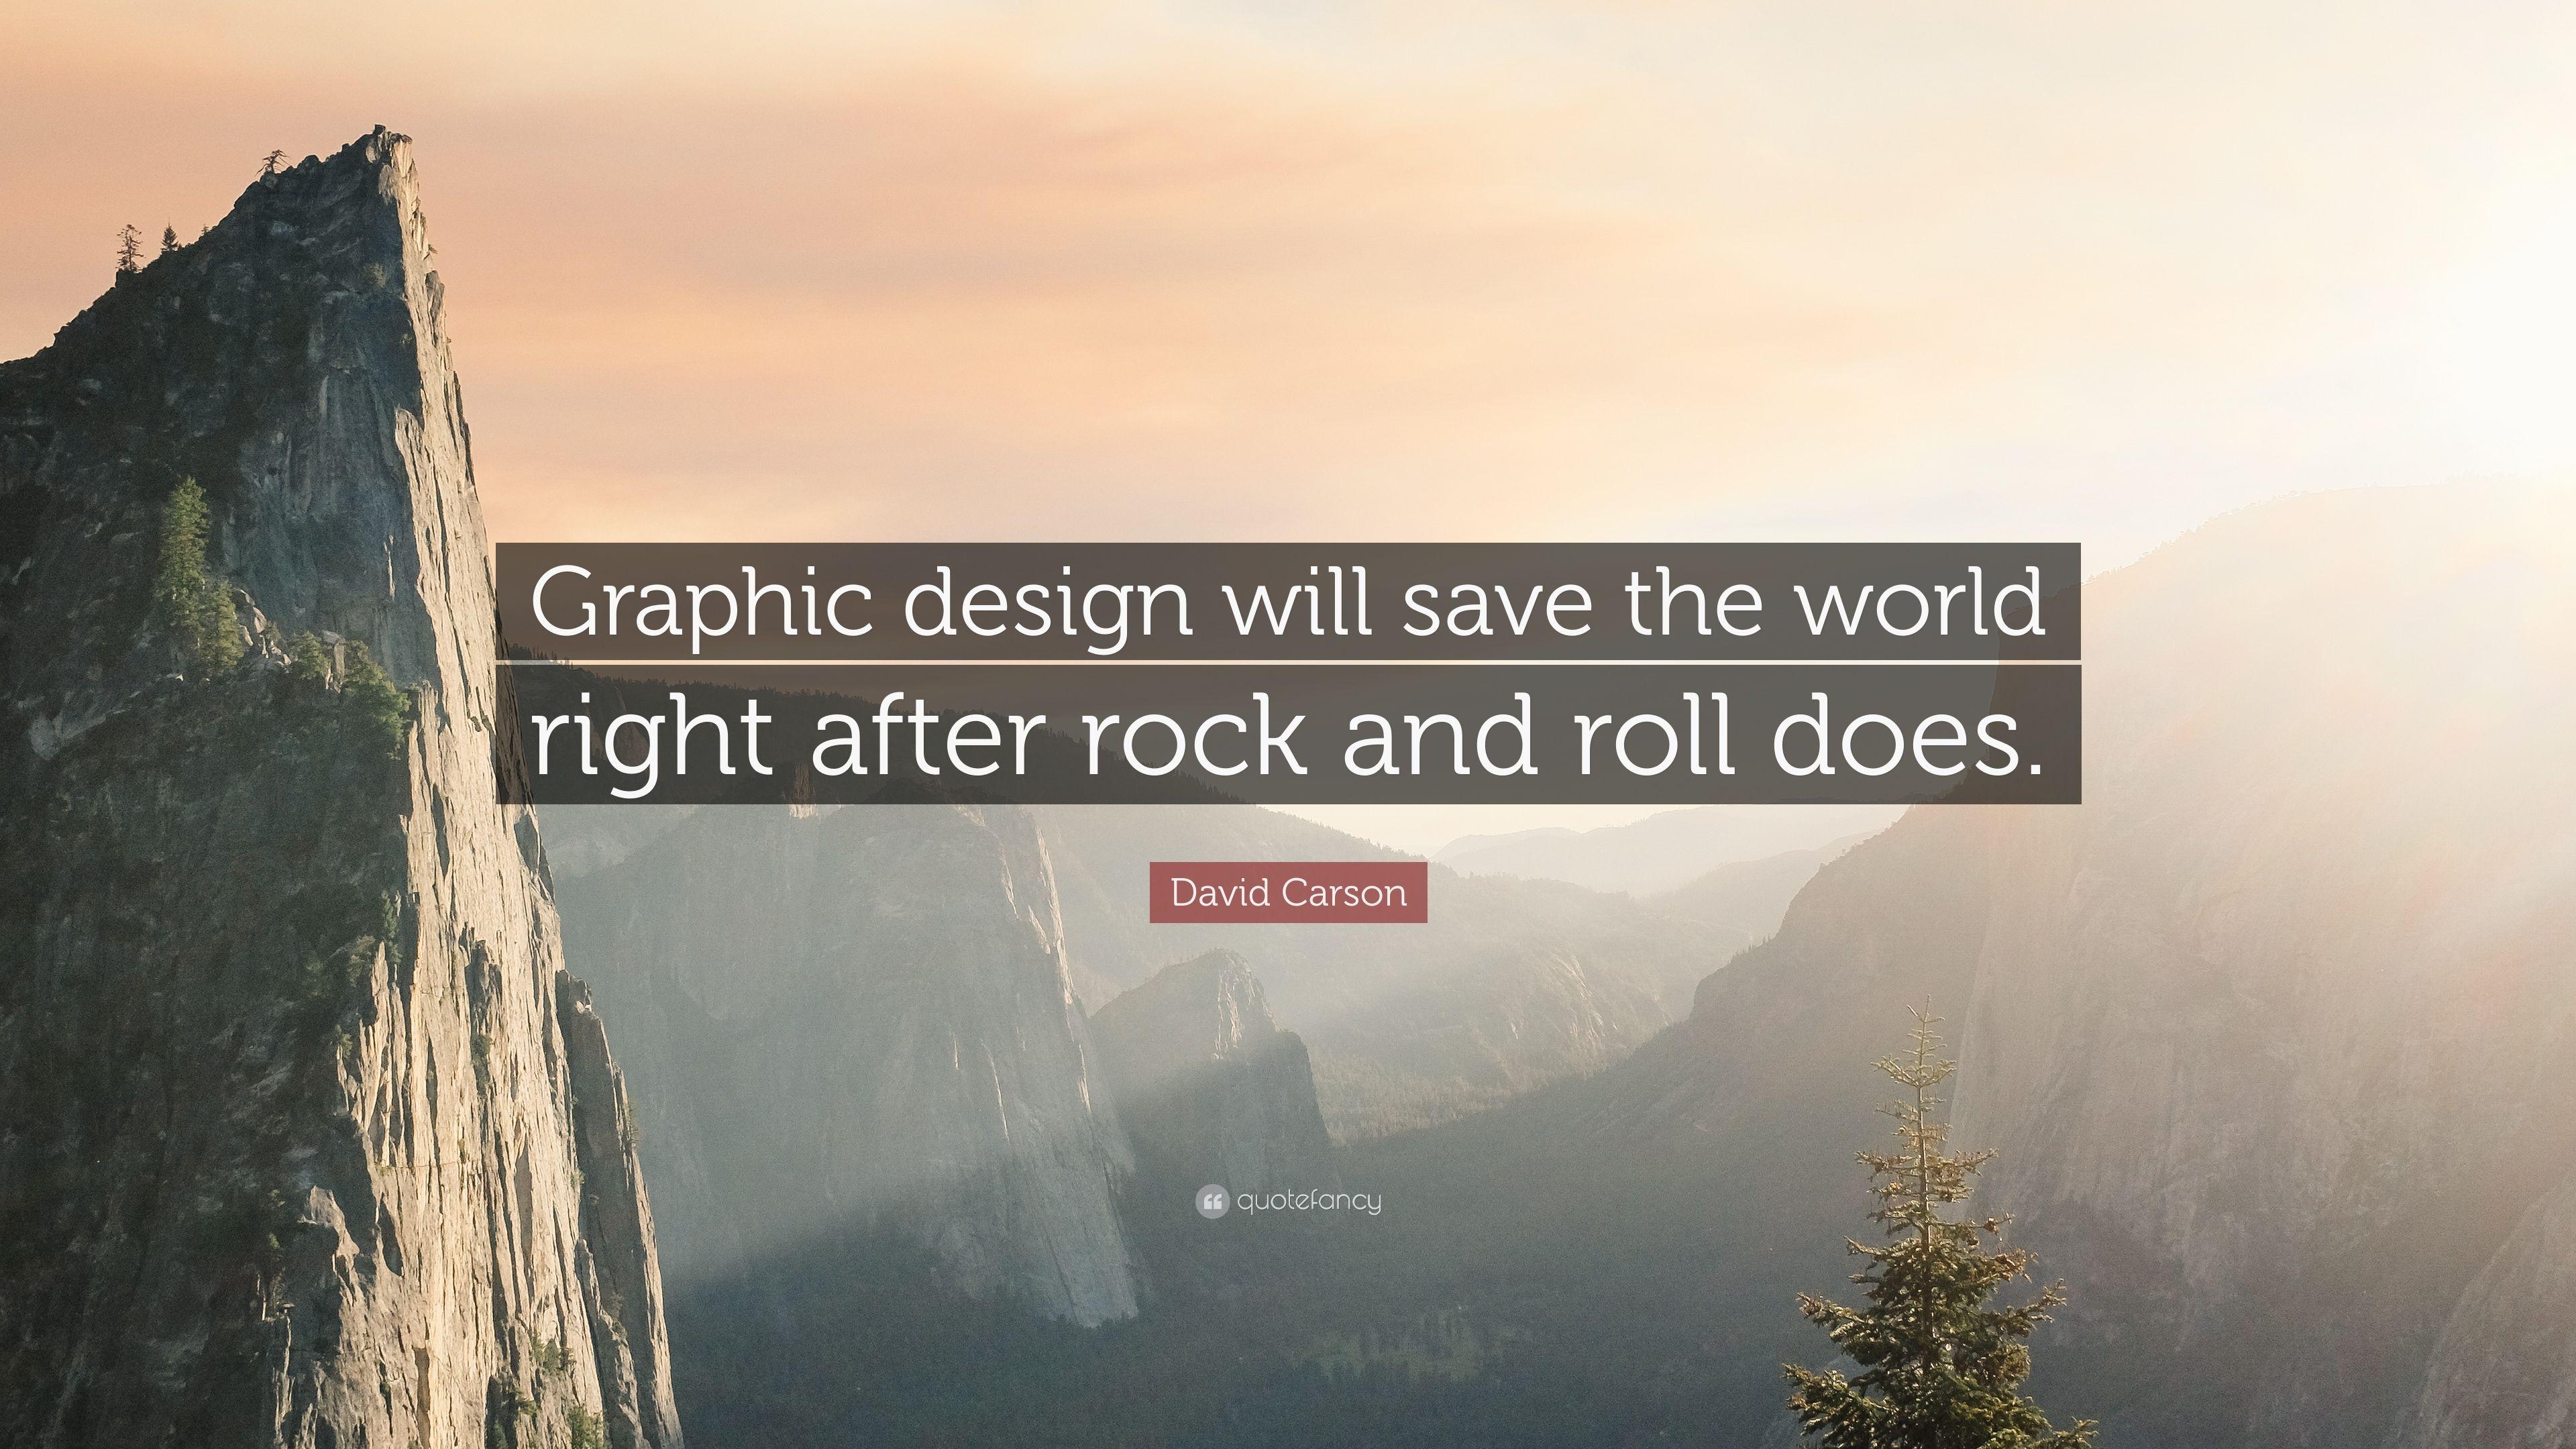 David Carson Quote: “Graphic design will save the world right after